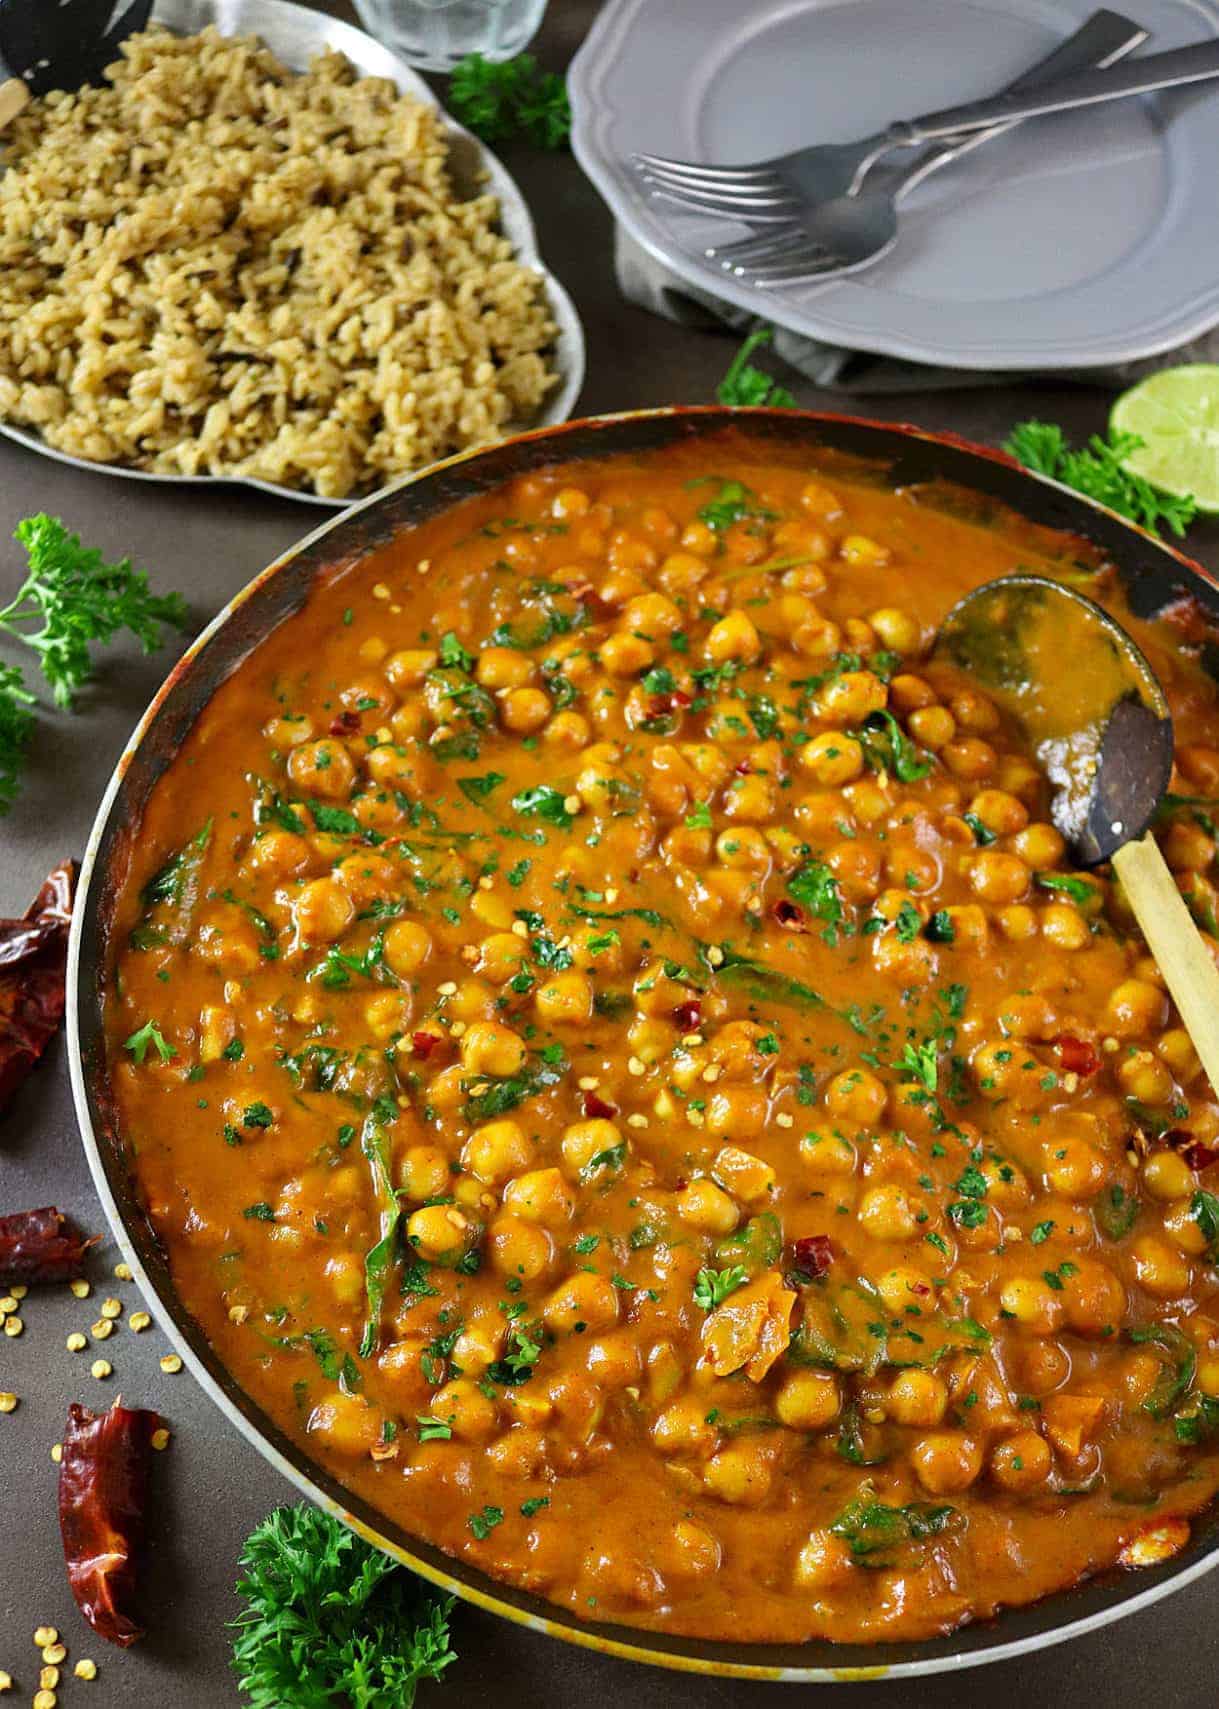 Easy Chickpea & Spinach Curry - With Uncle Ben's Rice. Recipe at http://RunninSrilankan.com #BensBeginners #UncleBensPromo